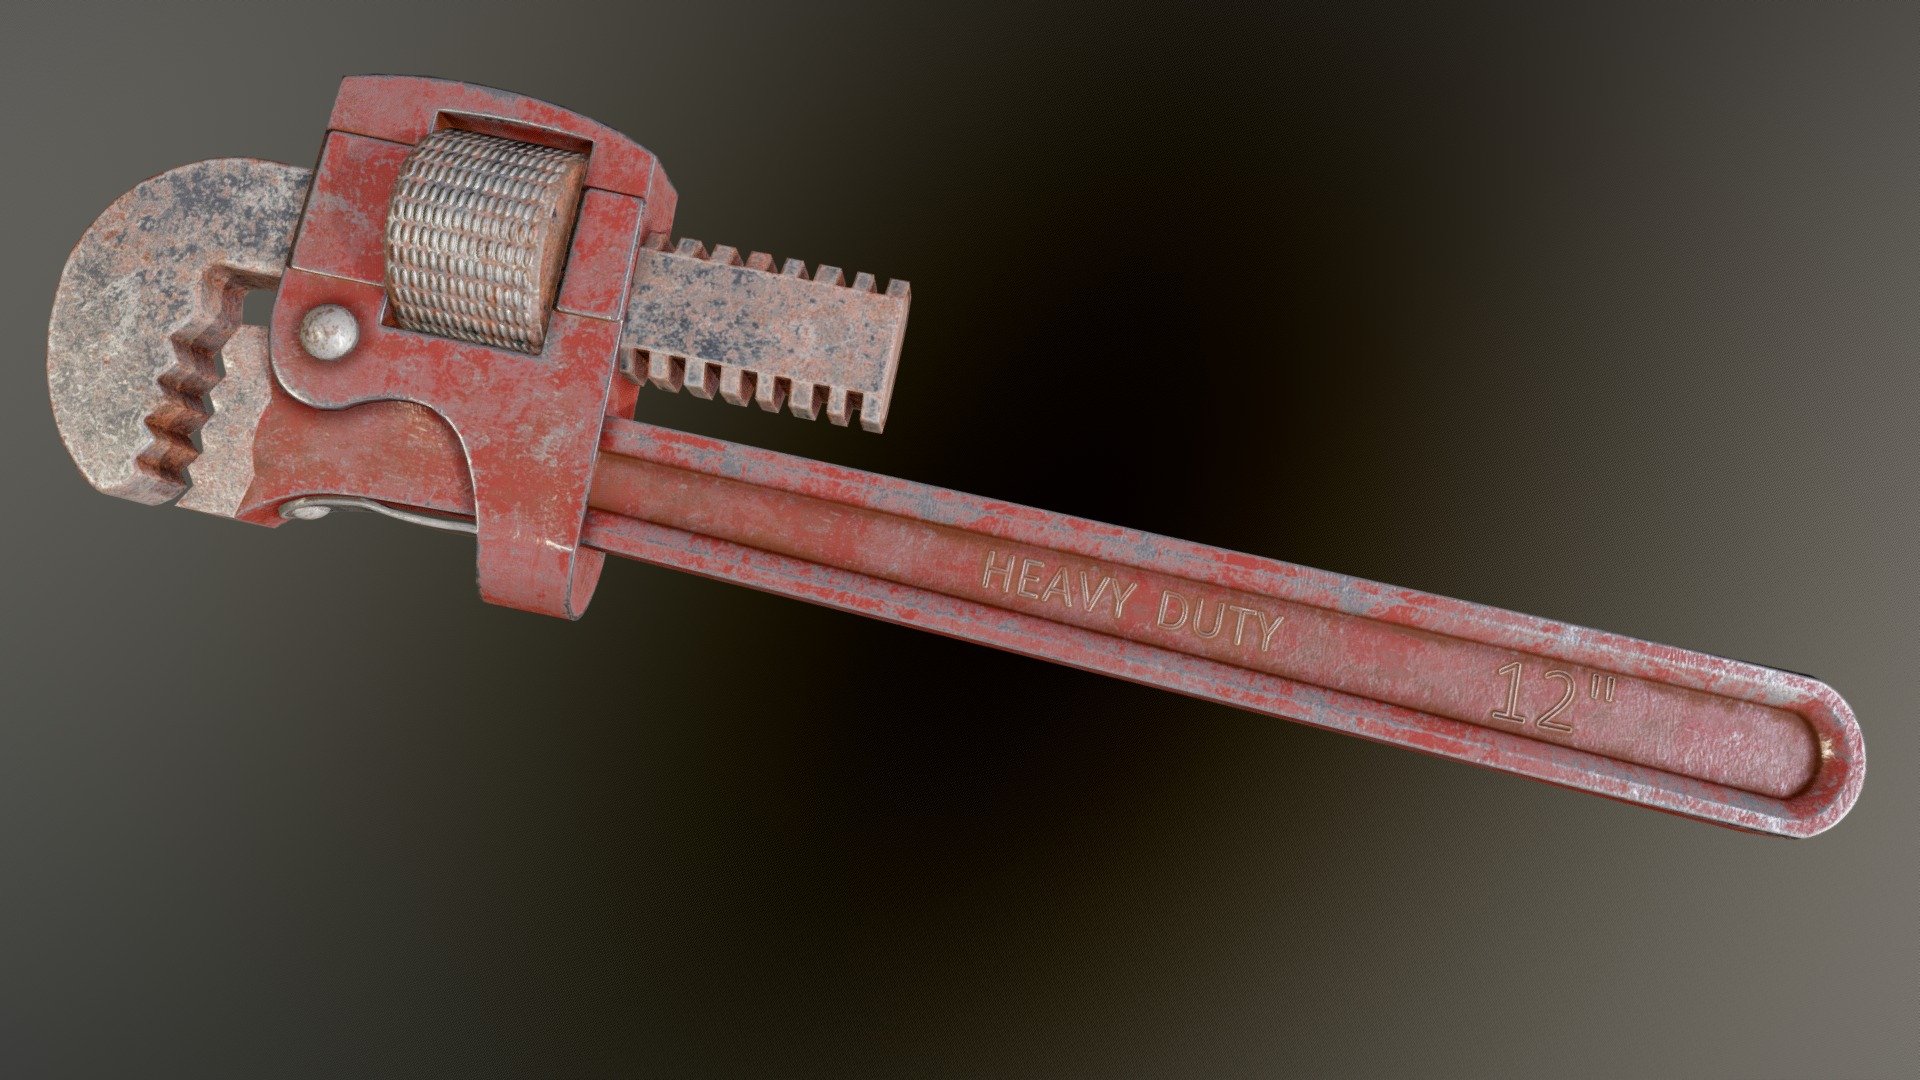 A pipe wrench model, created for an Indie game project. Modeled in 3ds Max, and textured in Substance Painter 3d model